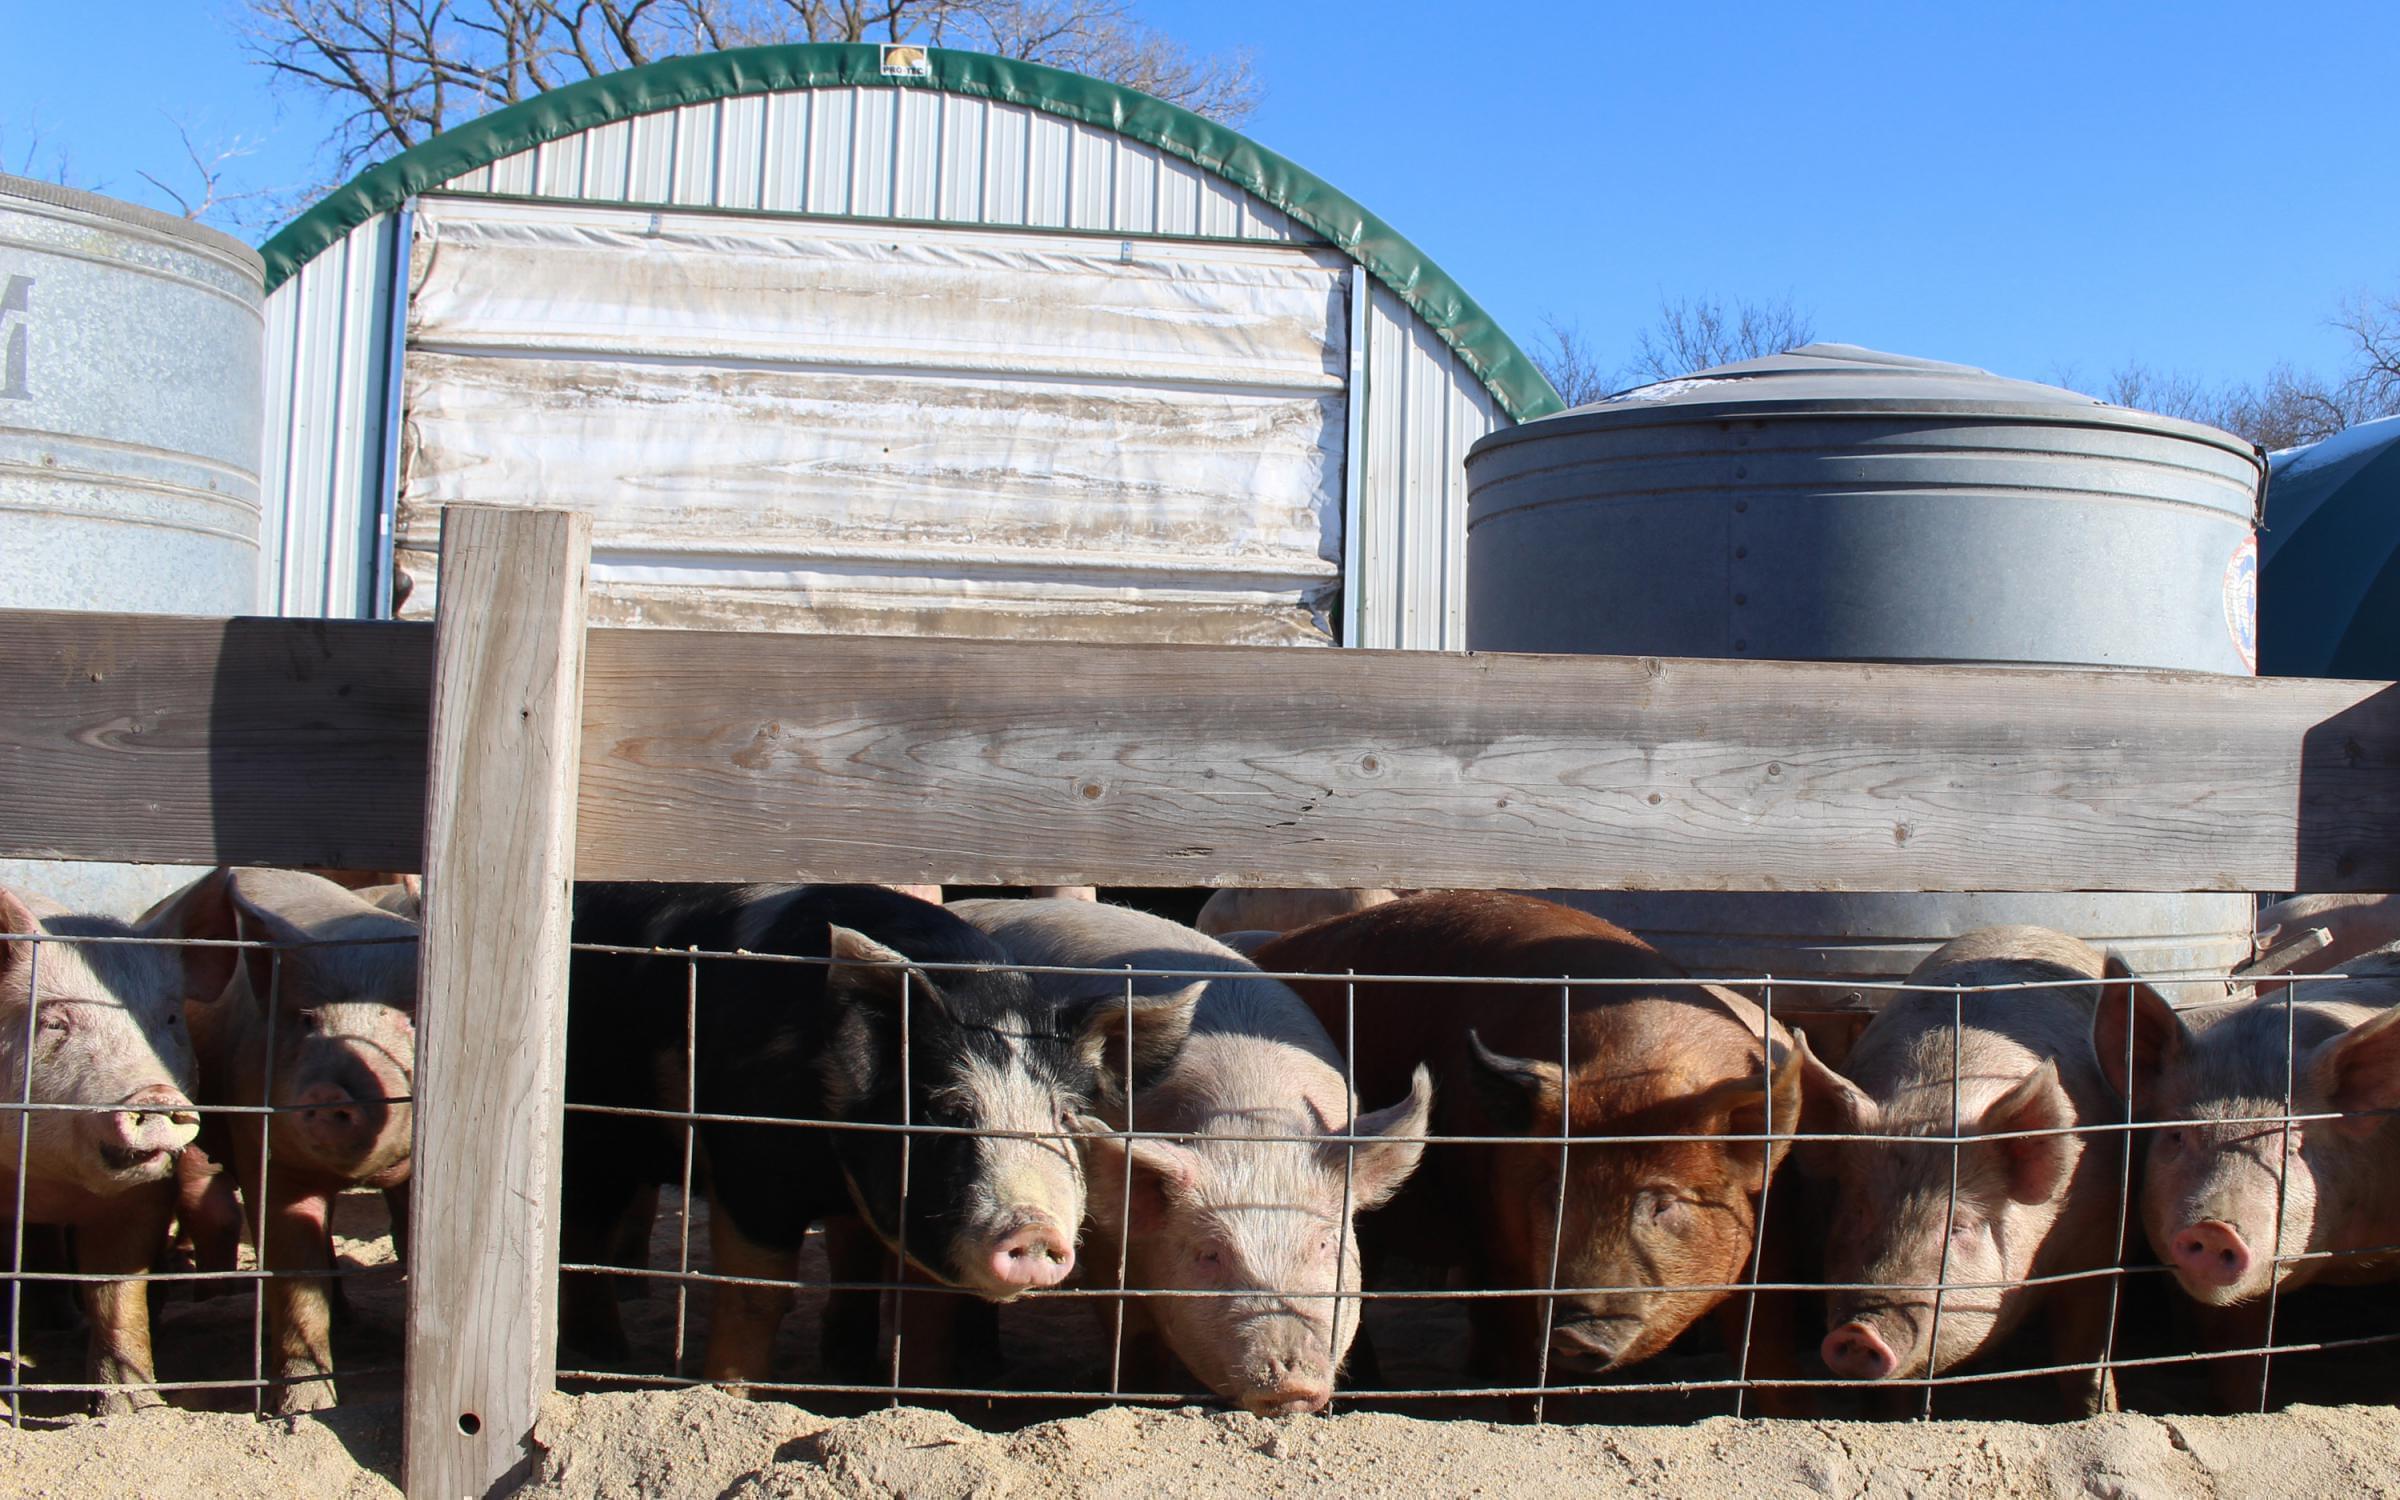 Hogs find the sunshine on a cold January day in eastern Nebraska. In addition to pigs, the Delaney family raises cattle and sheep and grows corn, soybeans and hay.